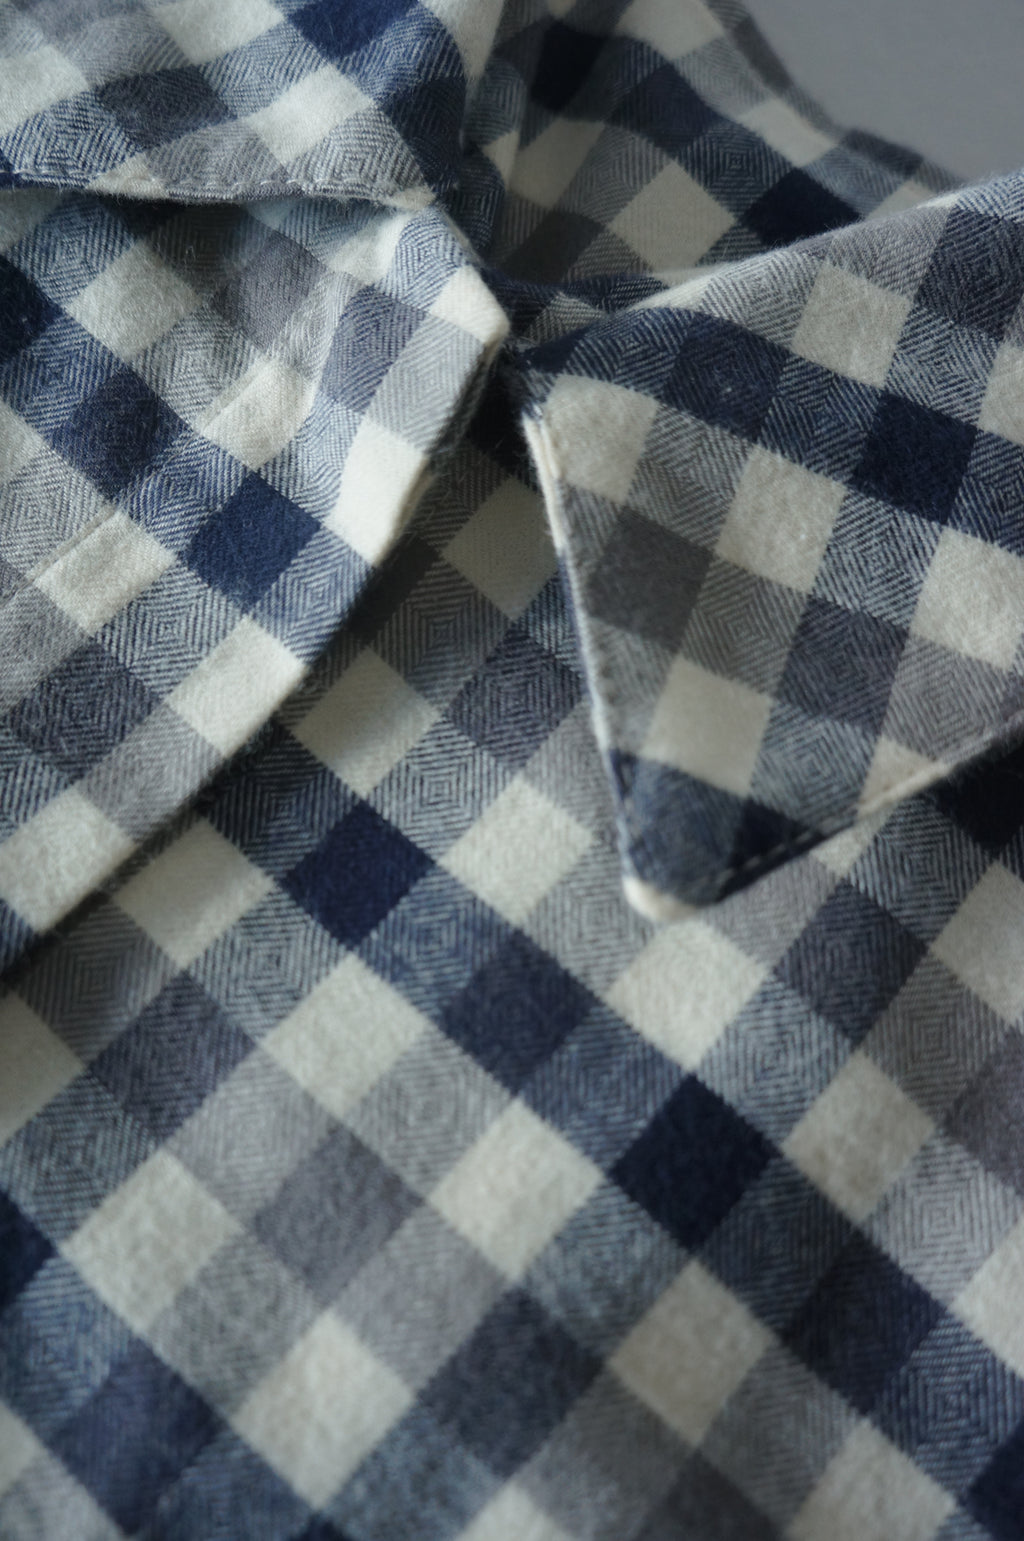 Checked SHIRT Flannel